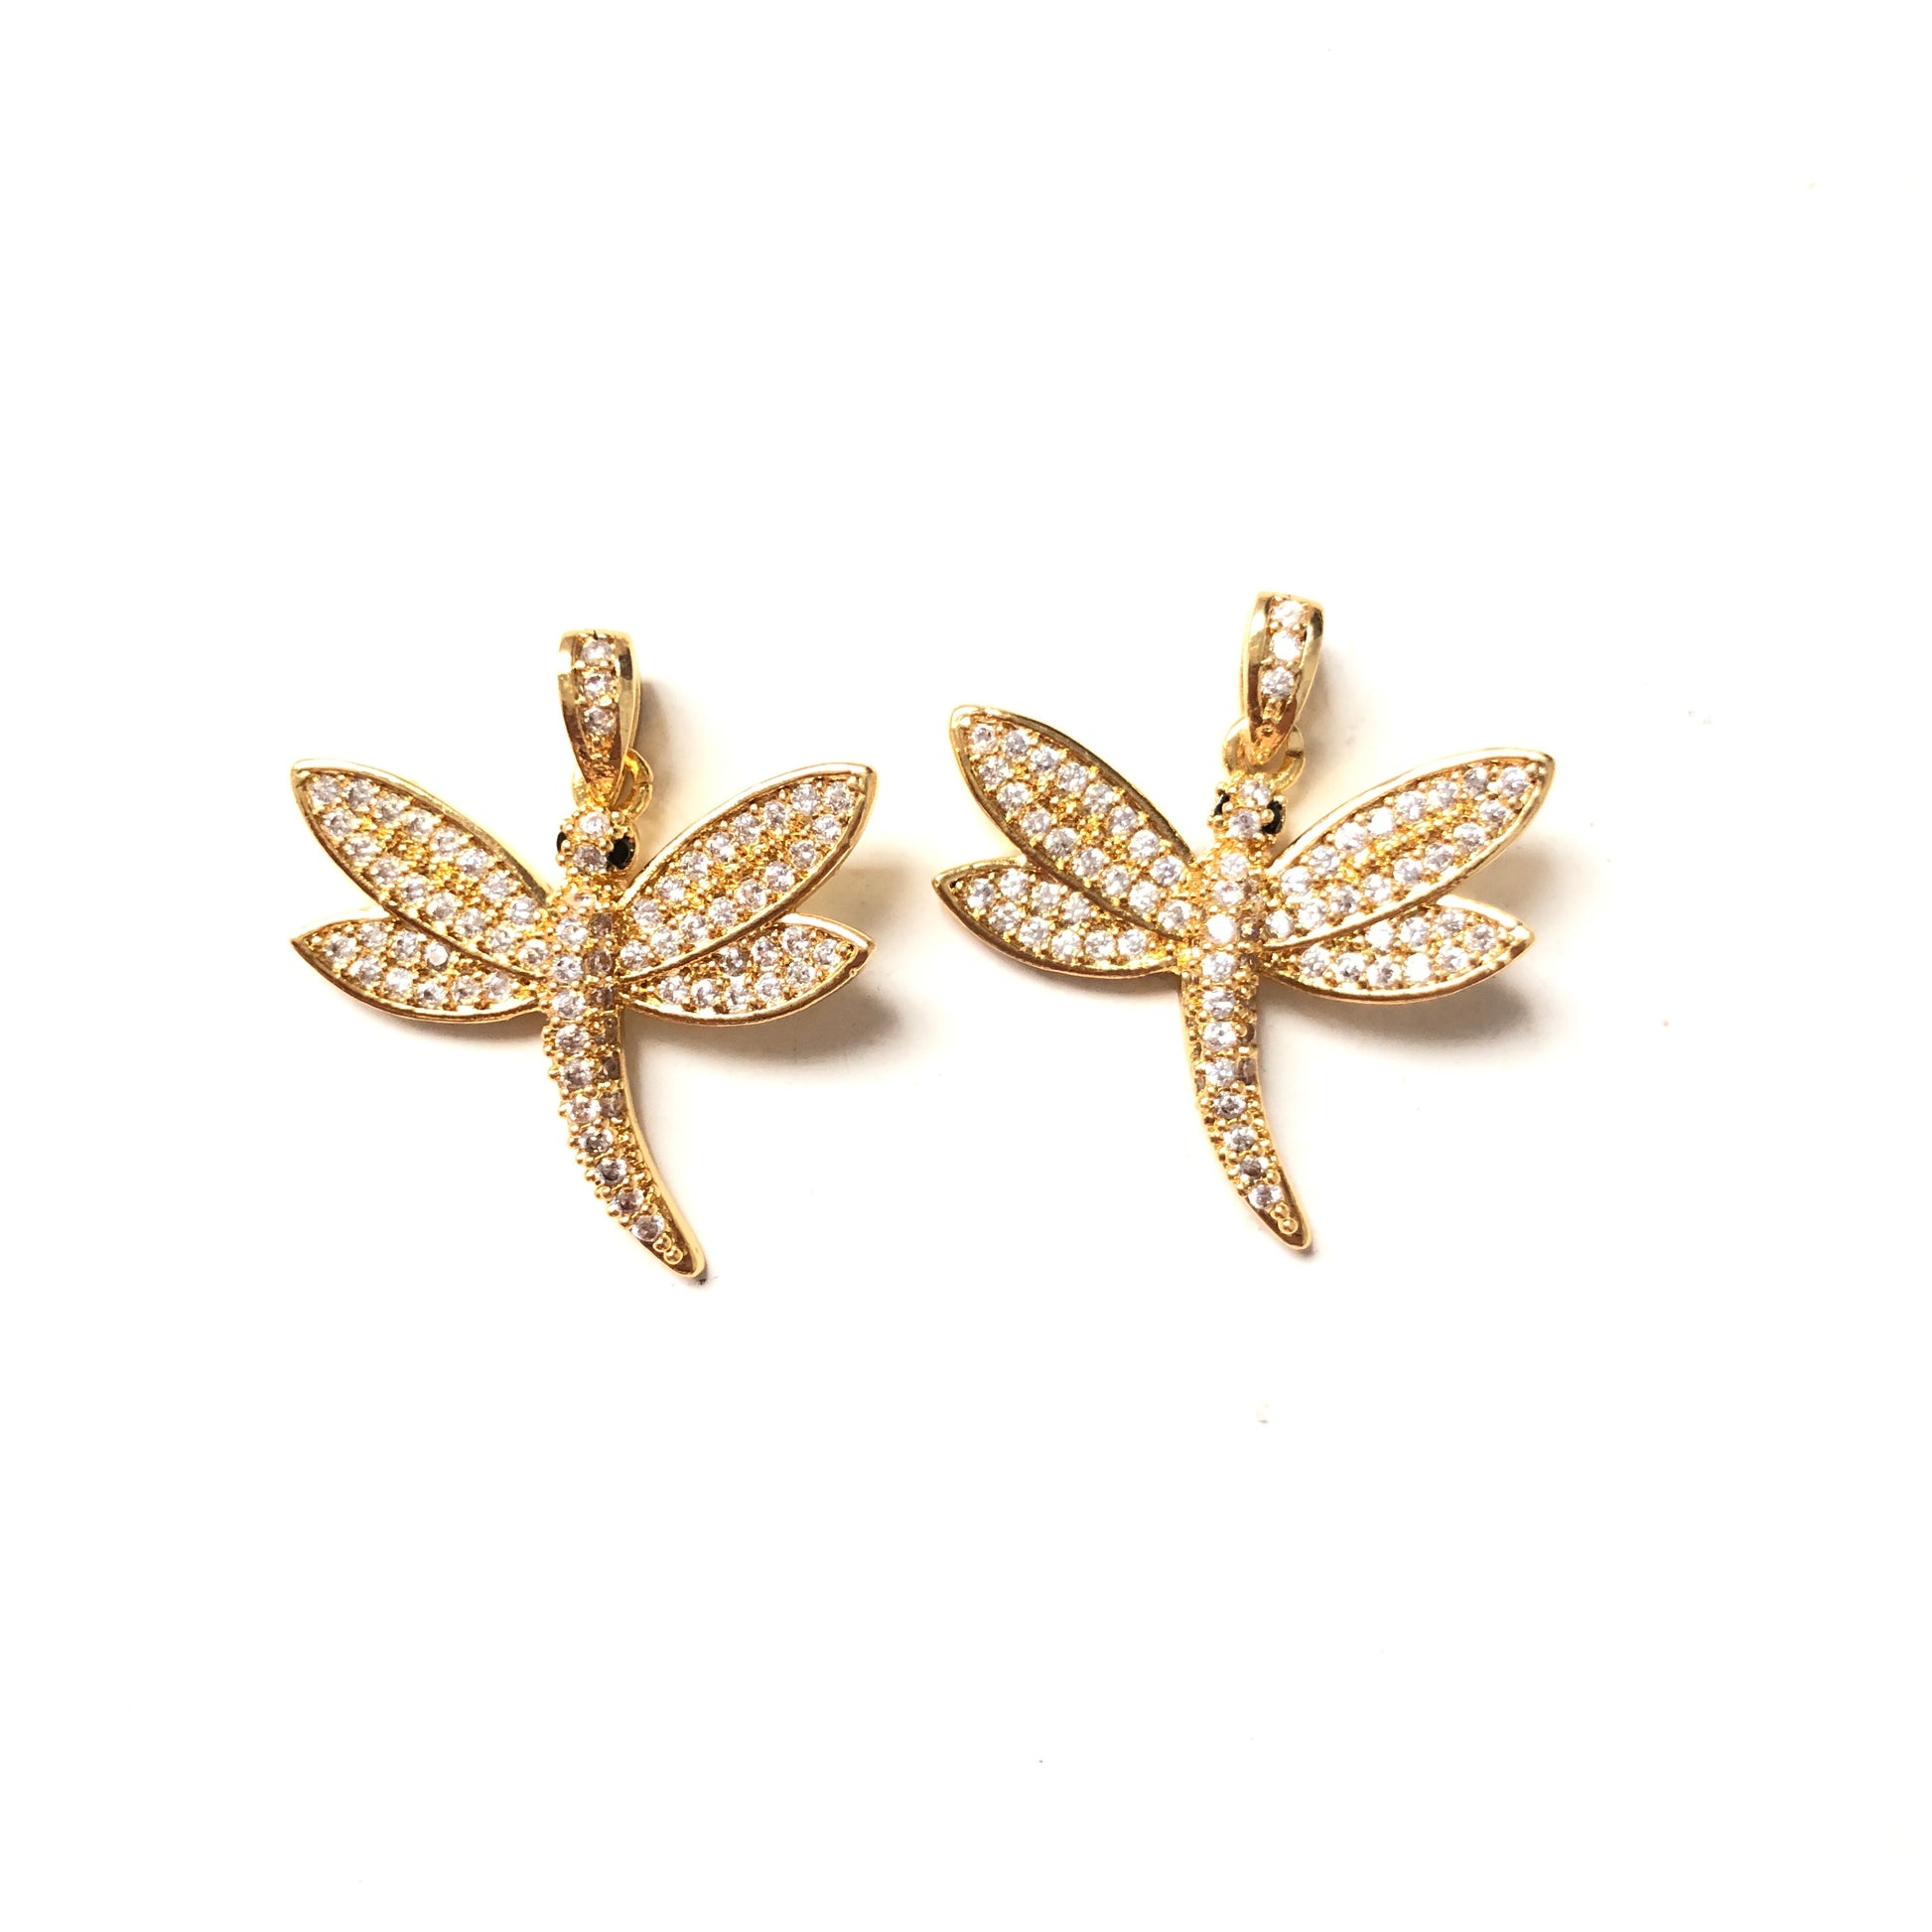 10pcs/lot 23.5*21.5mm CZ Paved Dragonfly Charms Gold CZ Paved Charms Animals & Insects Charms Beads Beyond